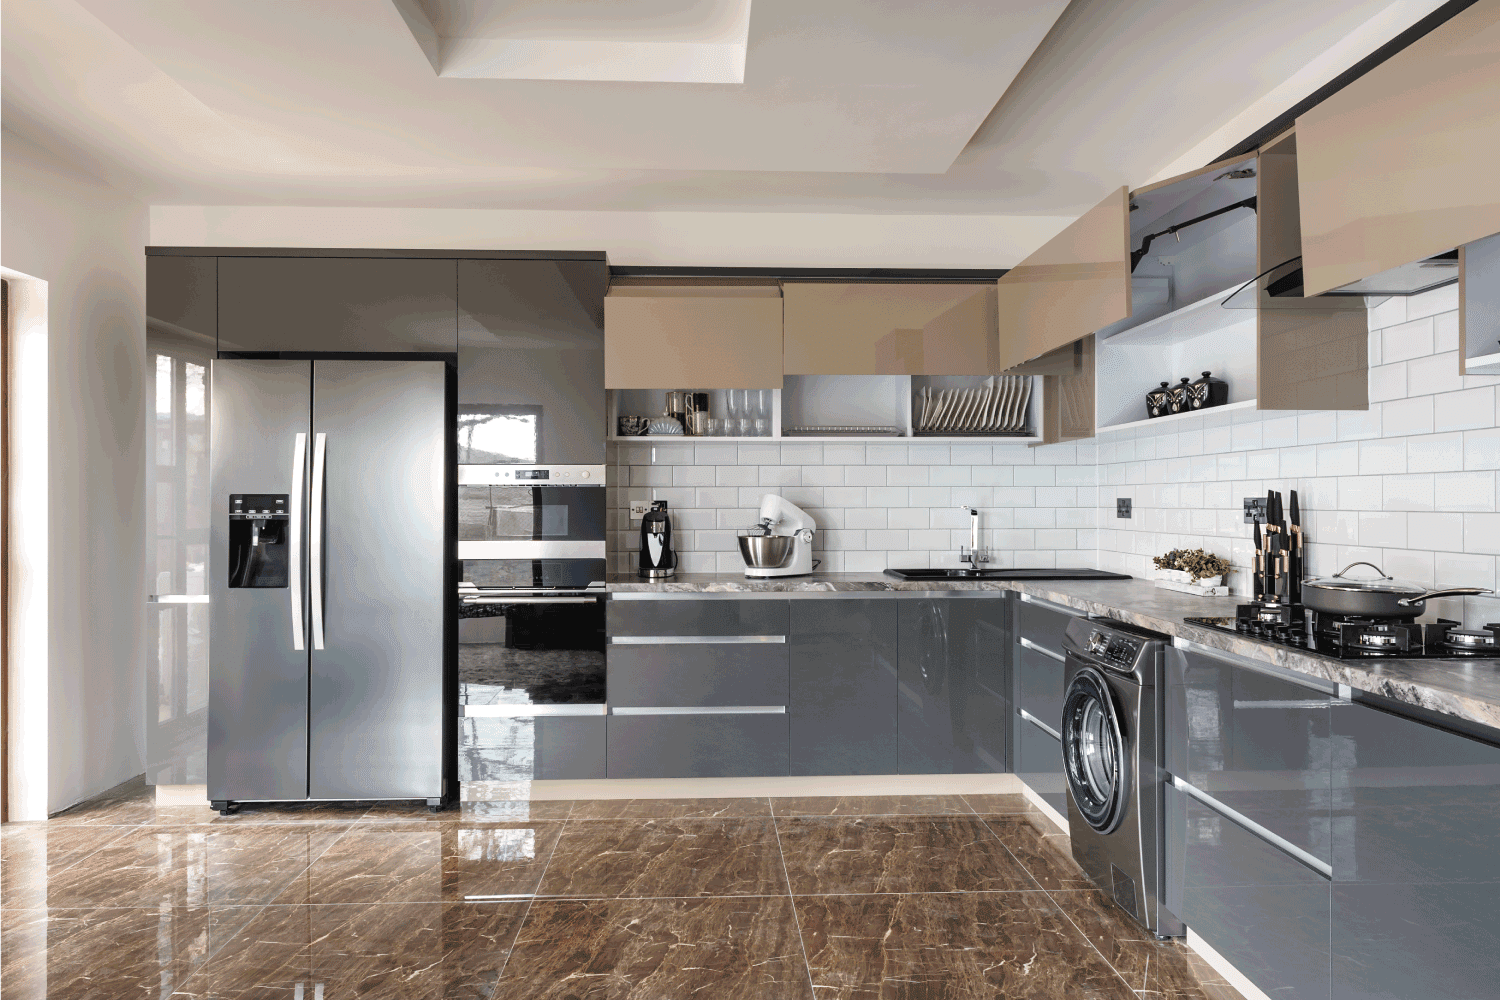 Spacious luxury well designed modern grey, beige and white kitchen with marble tiles floor and high end refrigerator